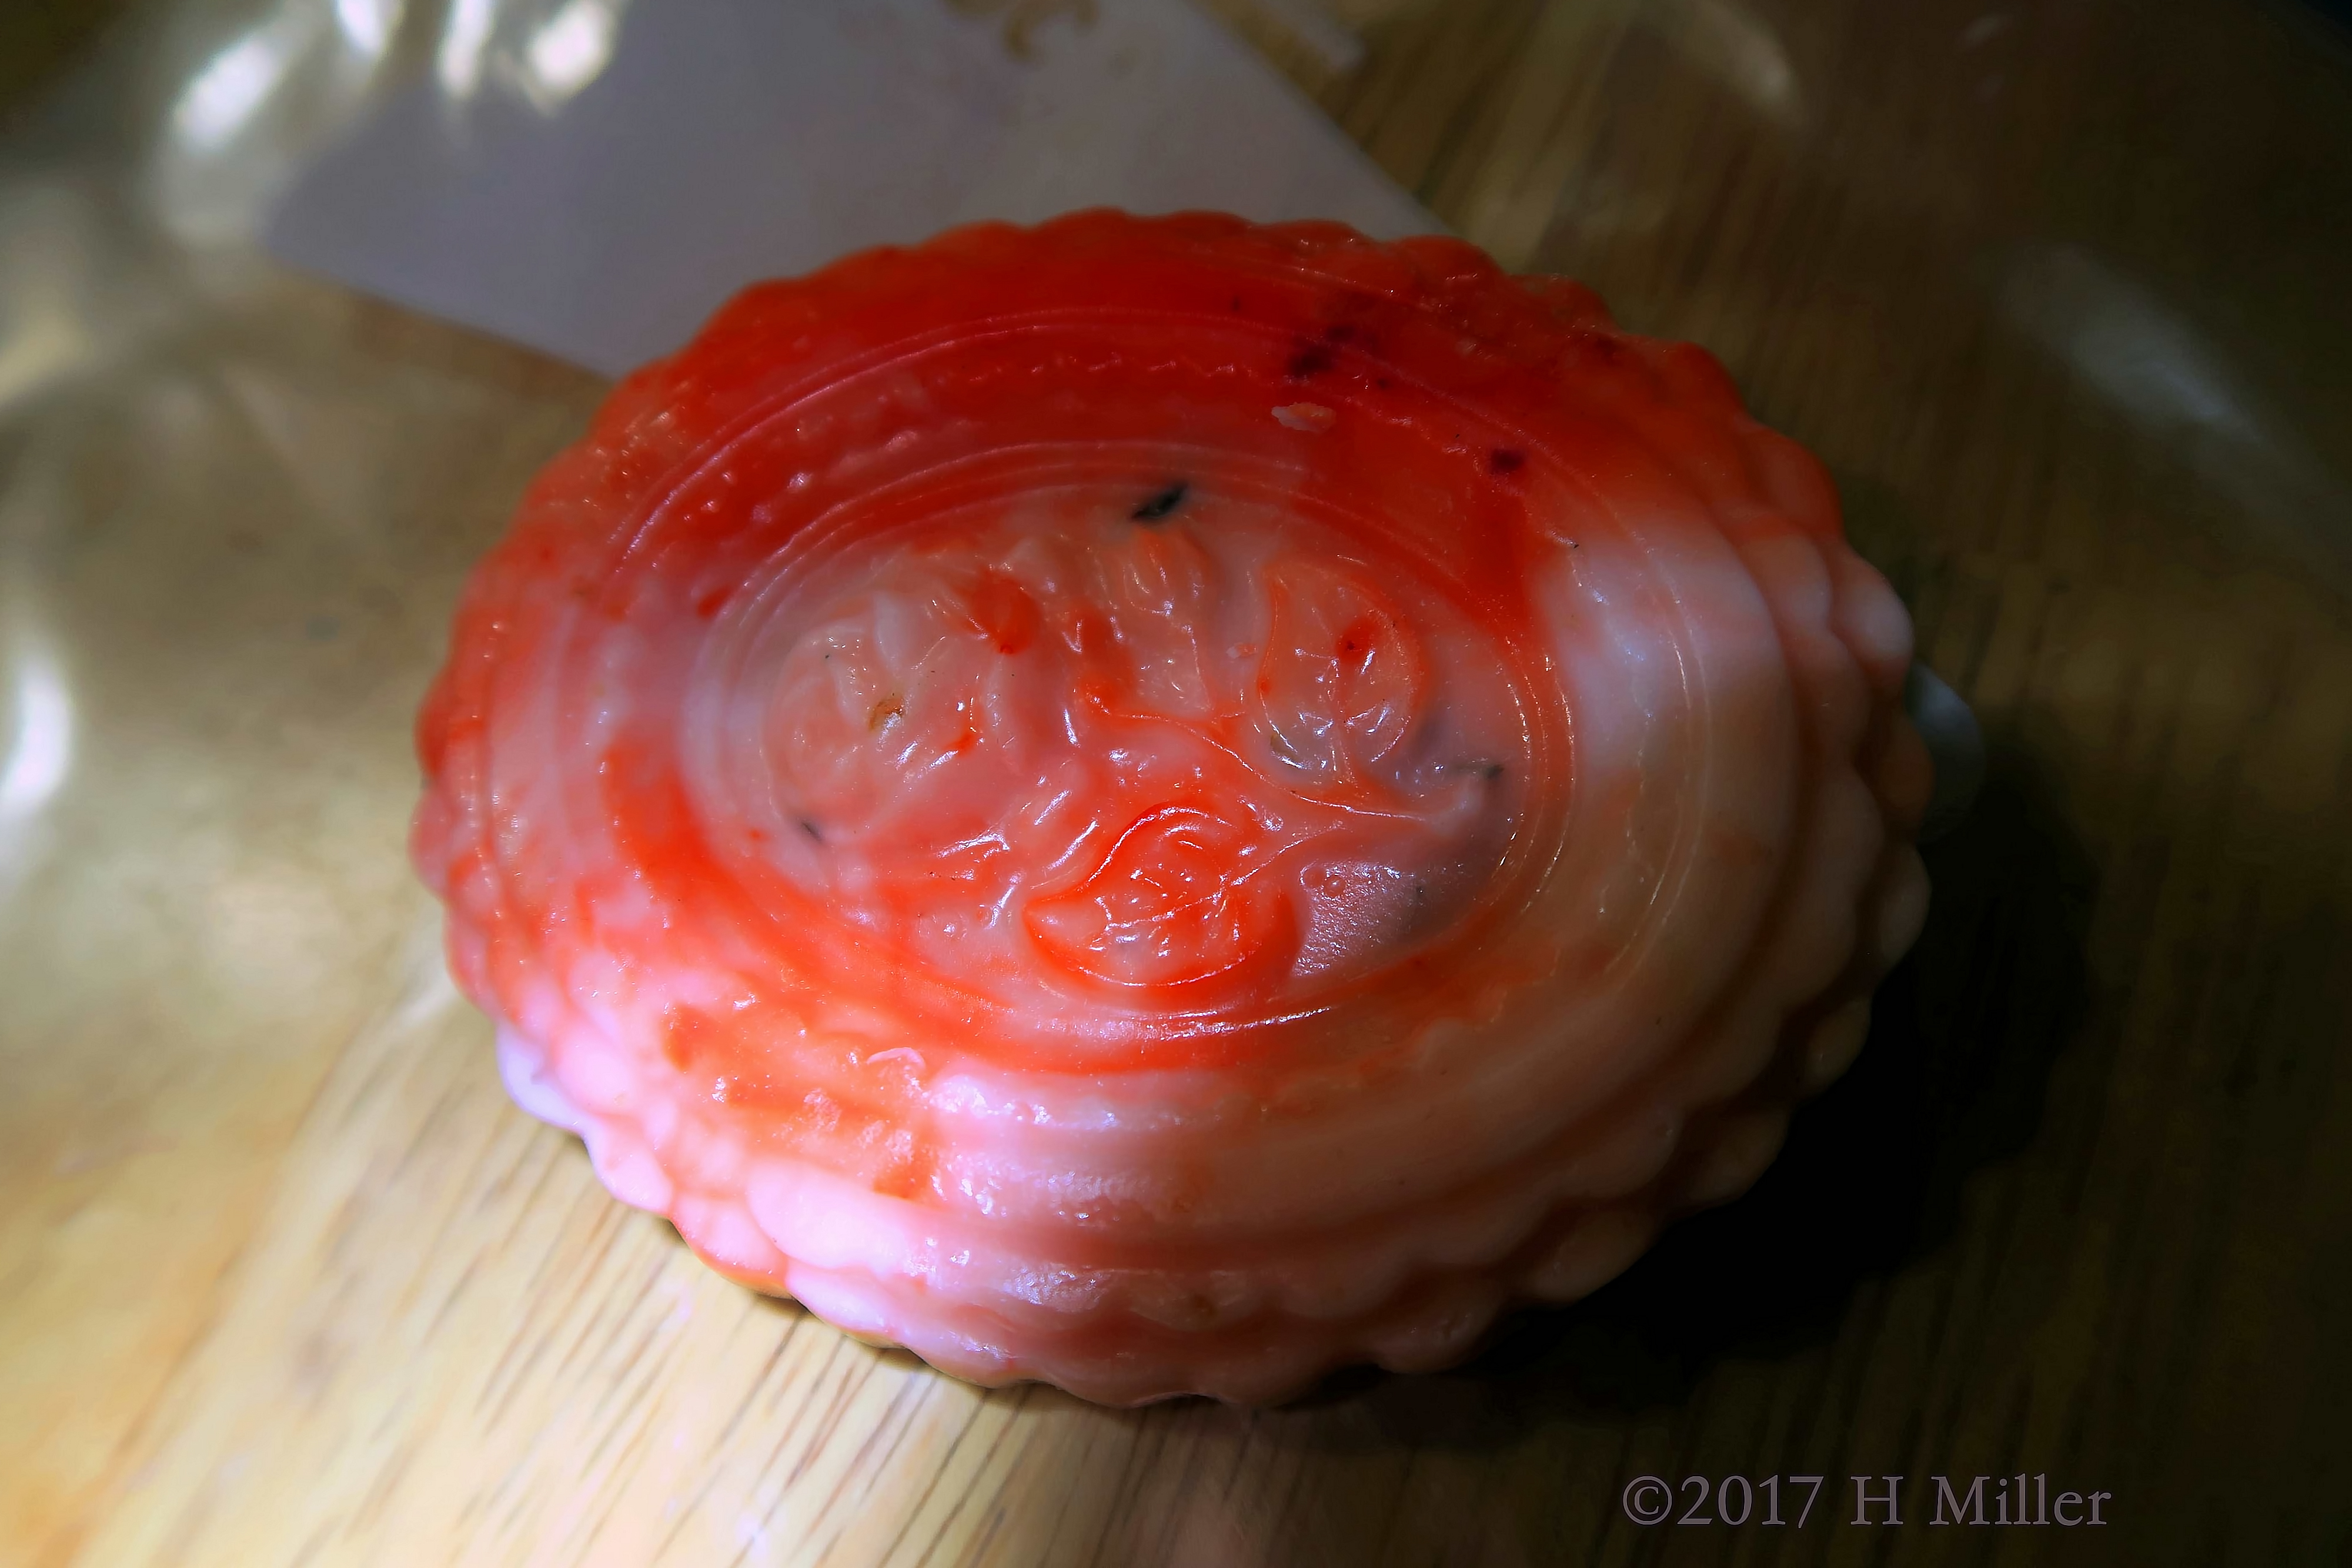 Pretty Homemade Soap Kids Crafts Projects! Love The Marbled Neon Orange Color Effect. 